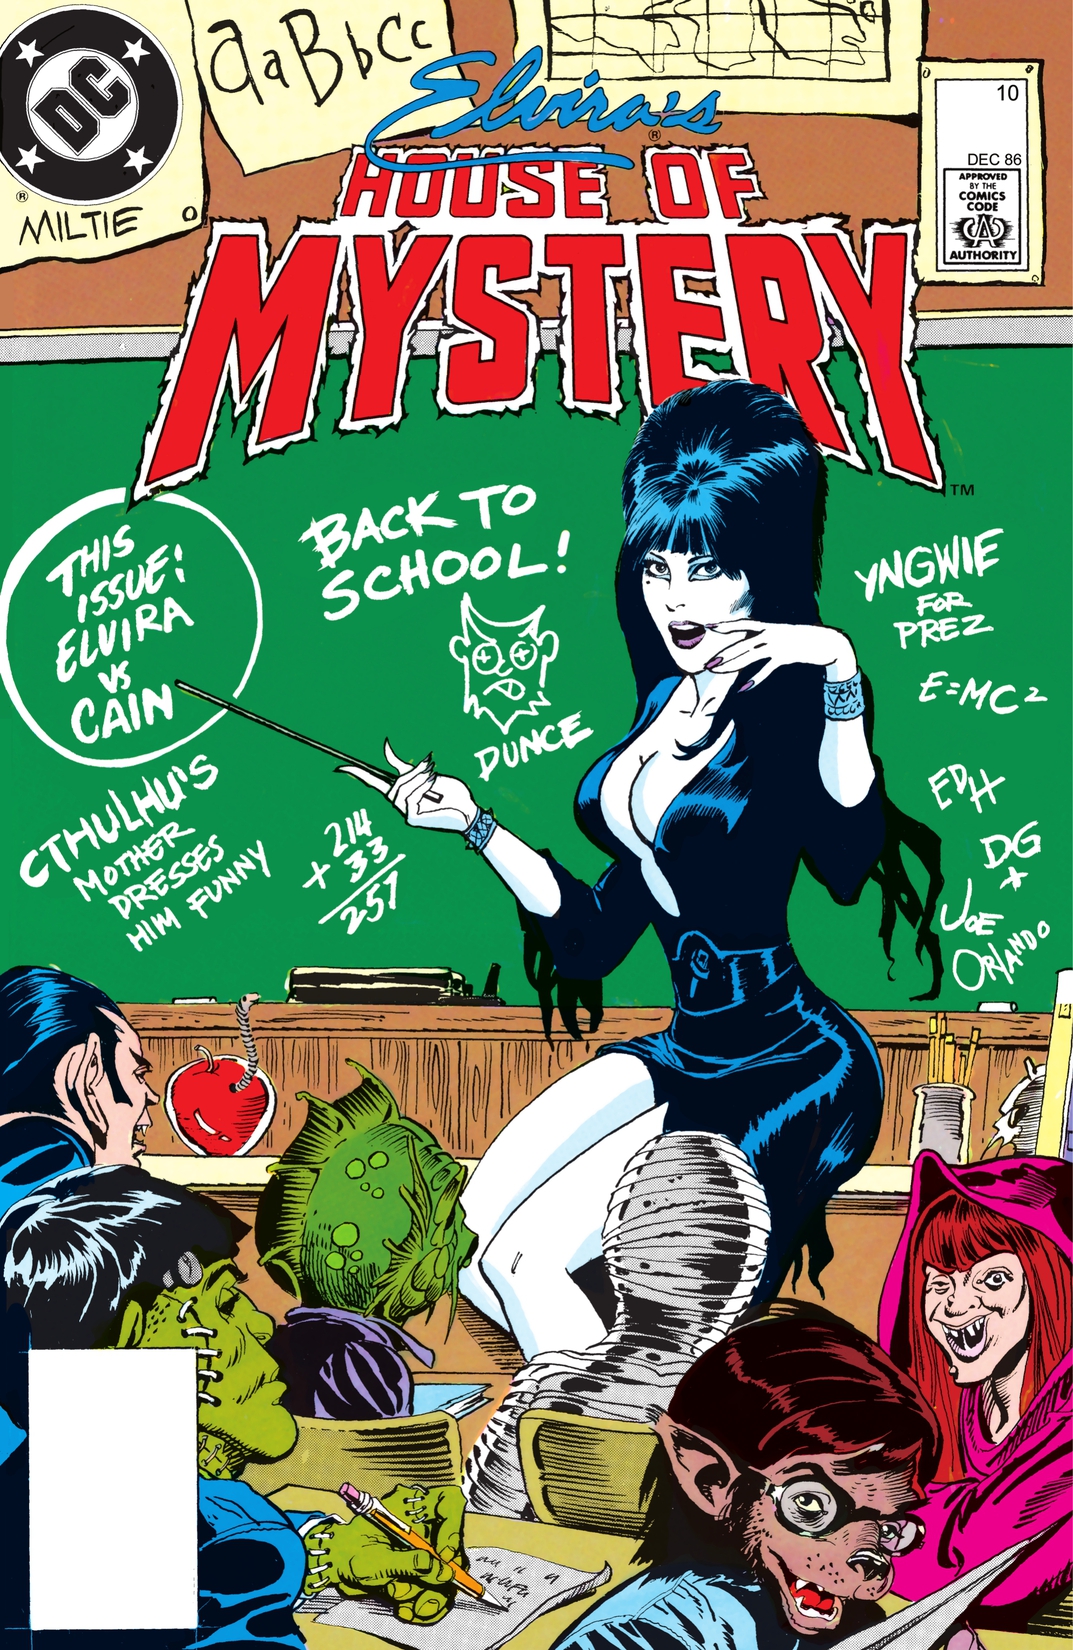 Elvira's House of Mystery #10 preview images